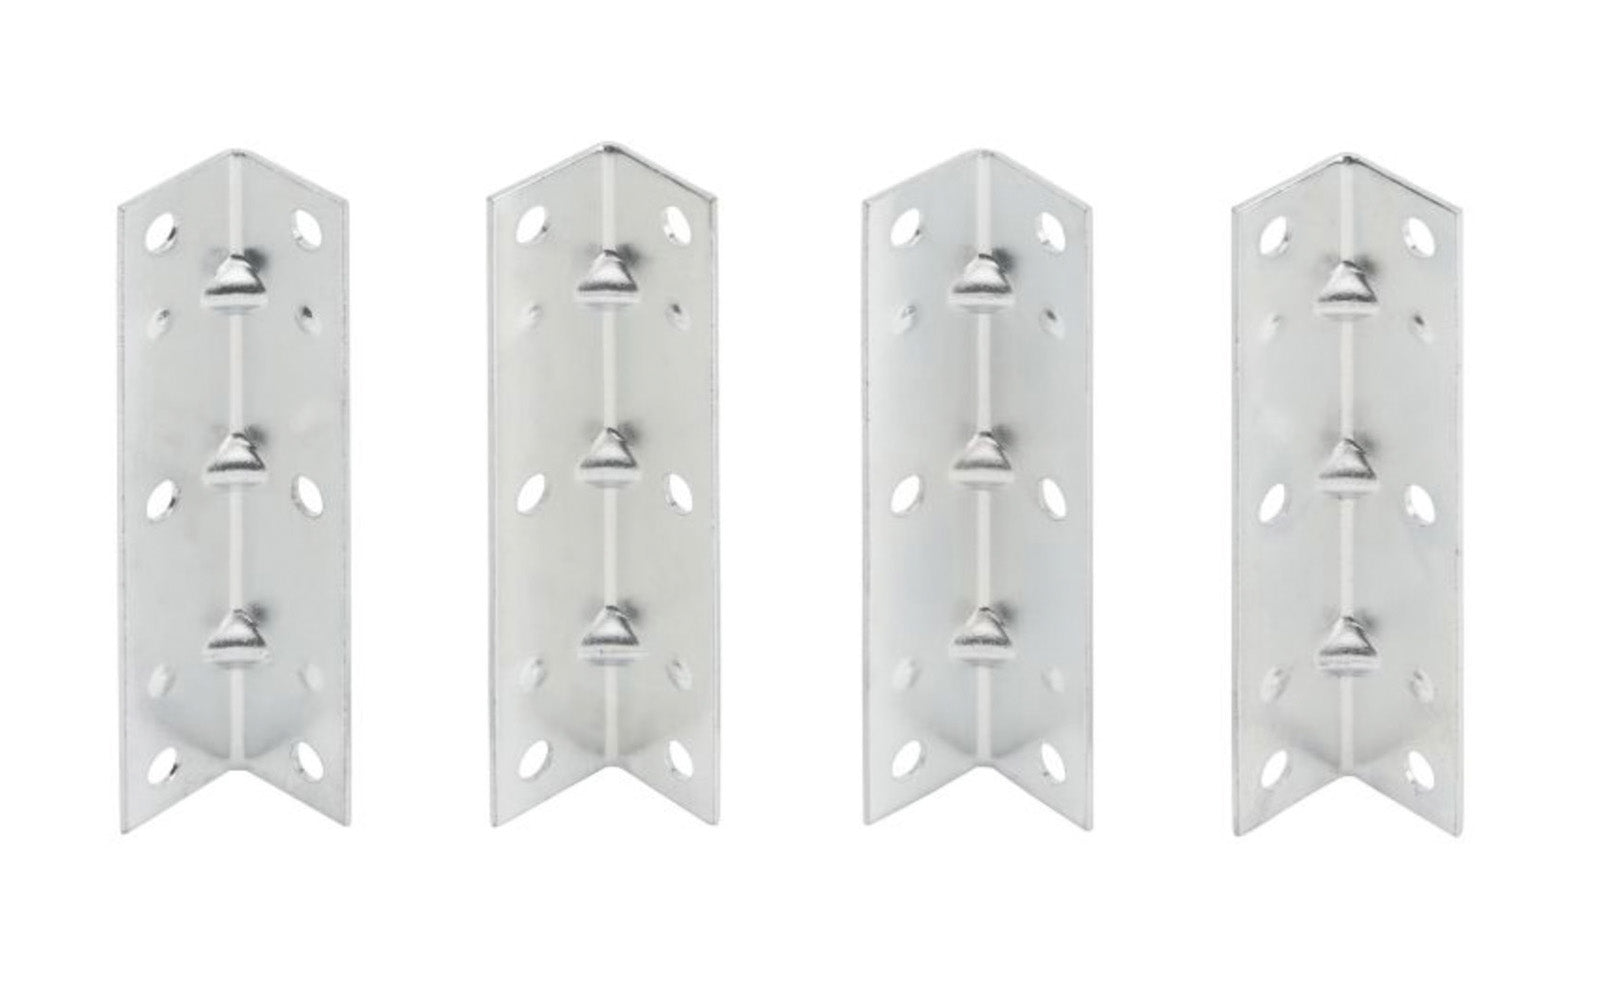 These 3-1/2" x 3/4" size corner braces are designed for furniture, countertops, shelving support, etc. Allows for quick & easy repair of items & other home, workshop, & industrial applications. Made of steel material with a zinc plated finish. 4 Pack. National Hardware Model N220-079. 038613220072. 